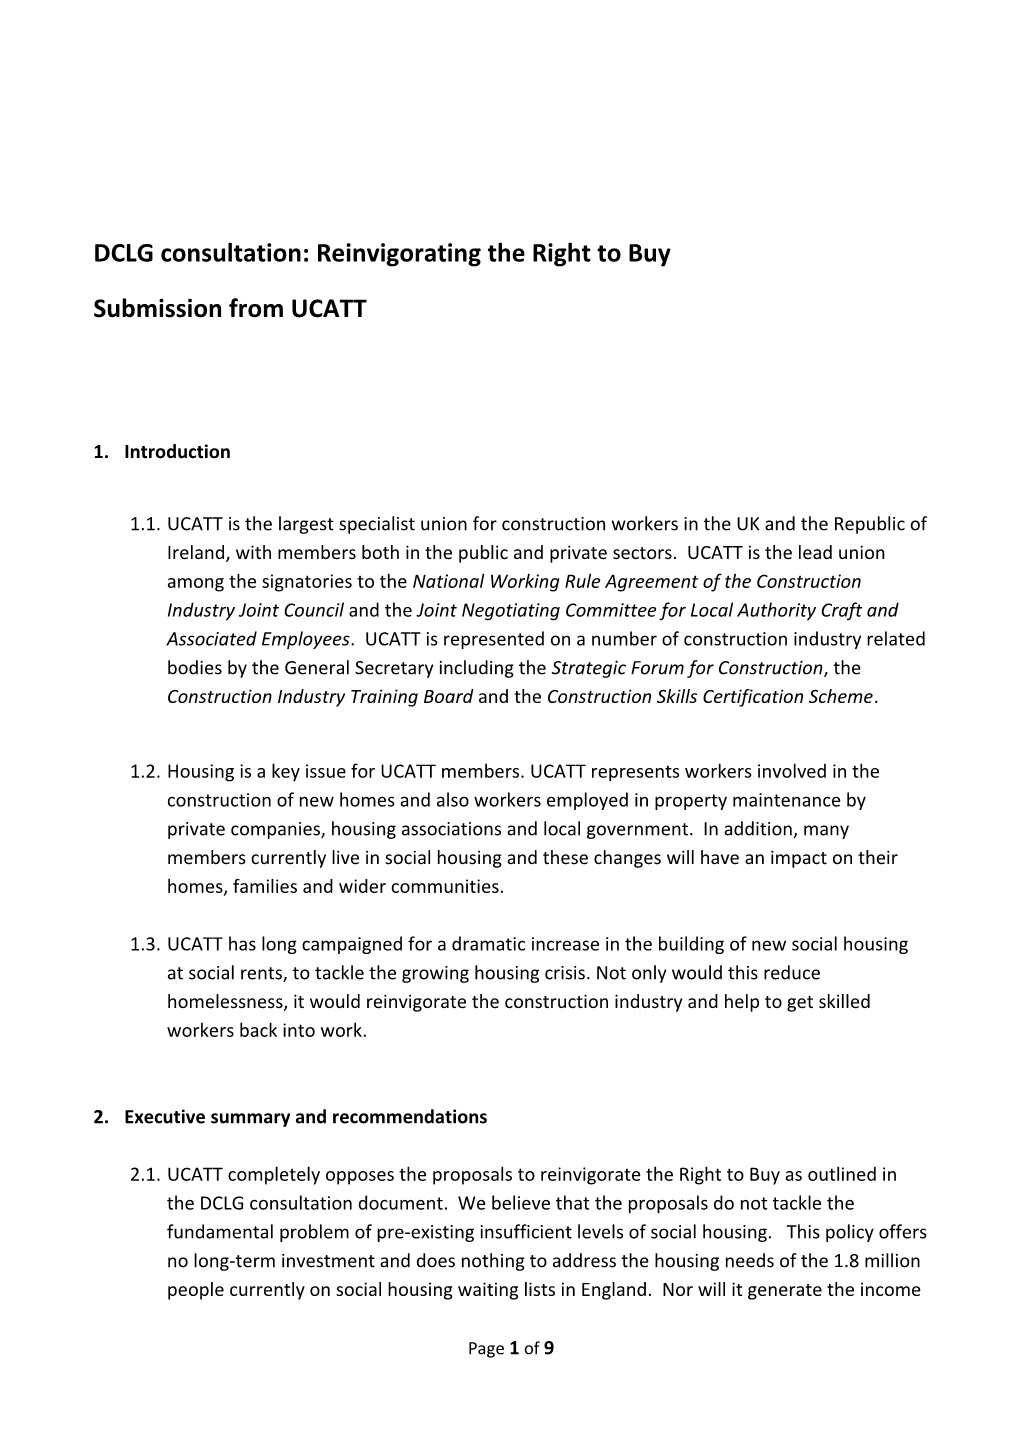 DCLG Consultation: Reinvigorating the Right to Buy